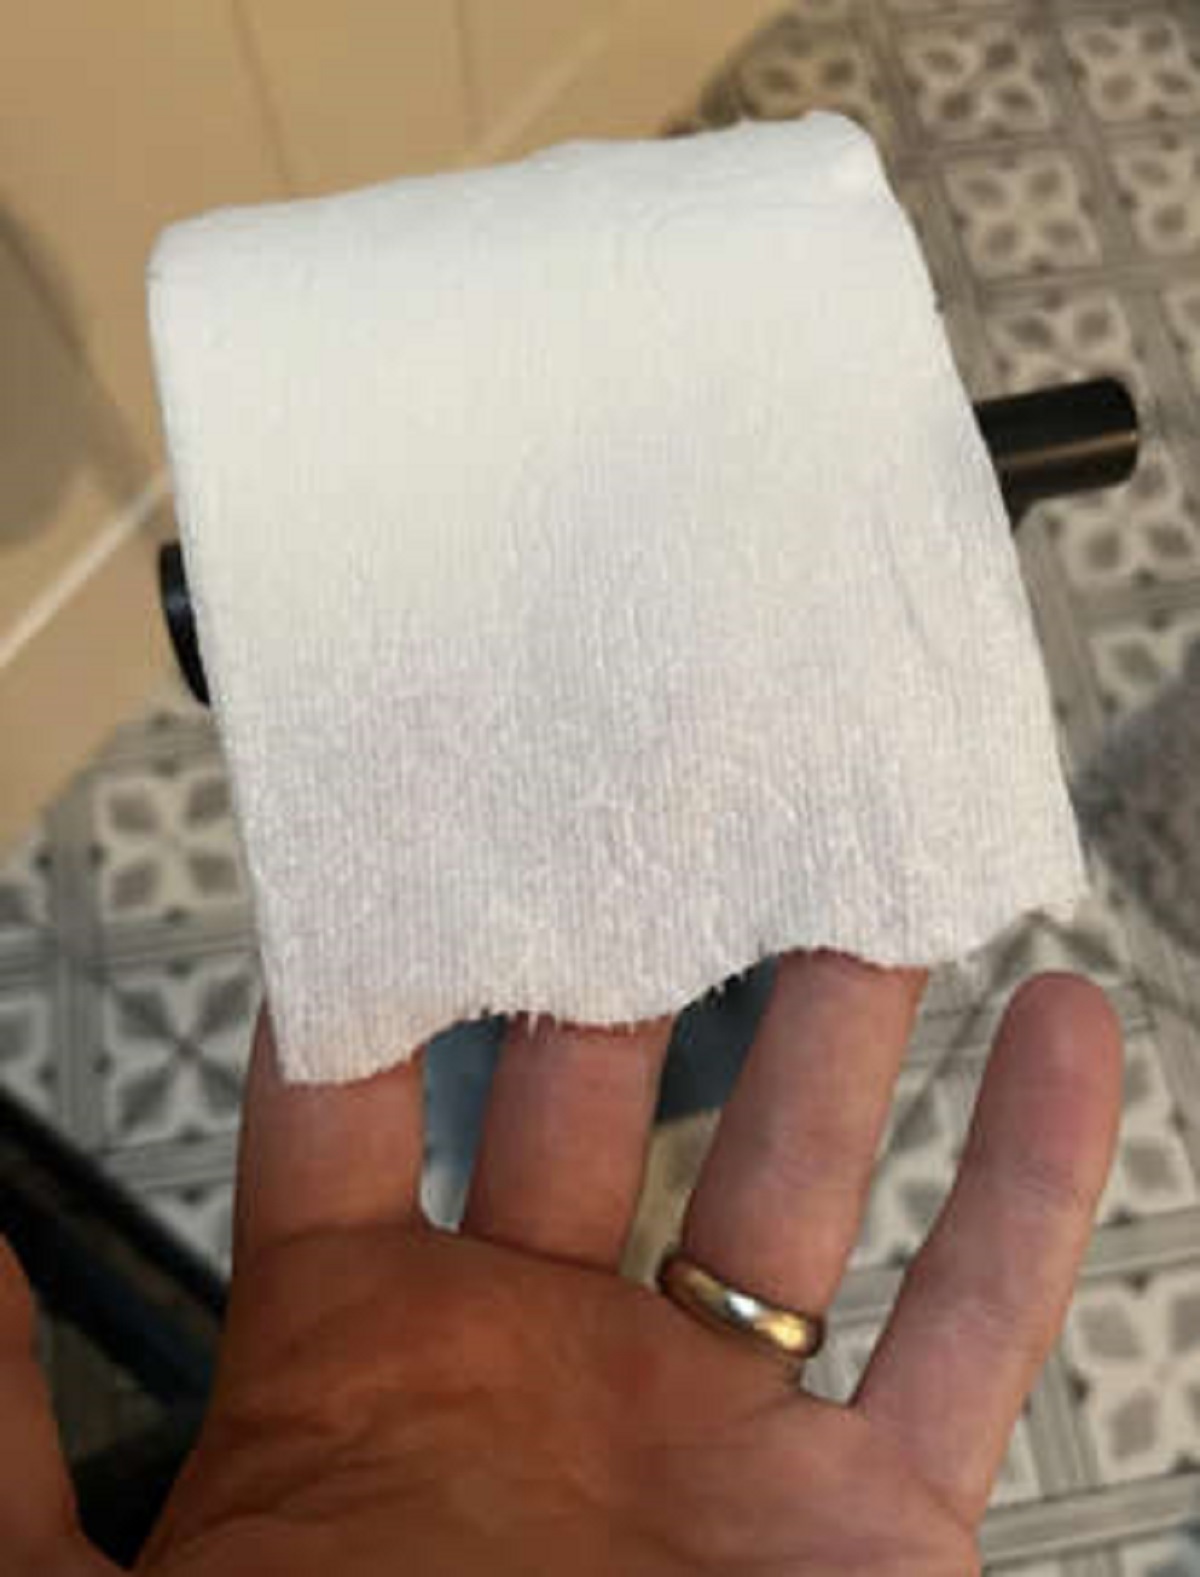 You wanted a new way to wipe yourself? Toilet paper with wavy perforations.